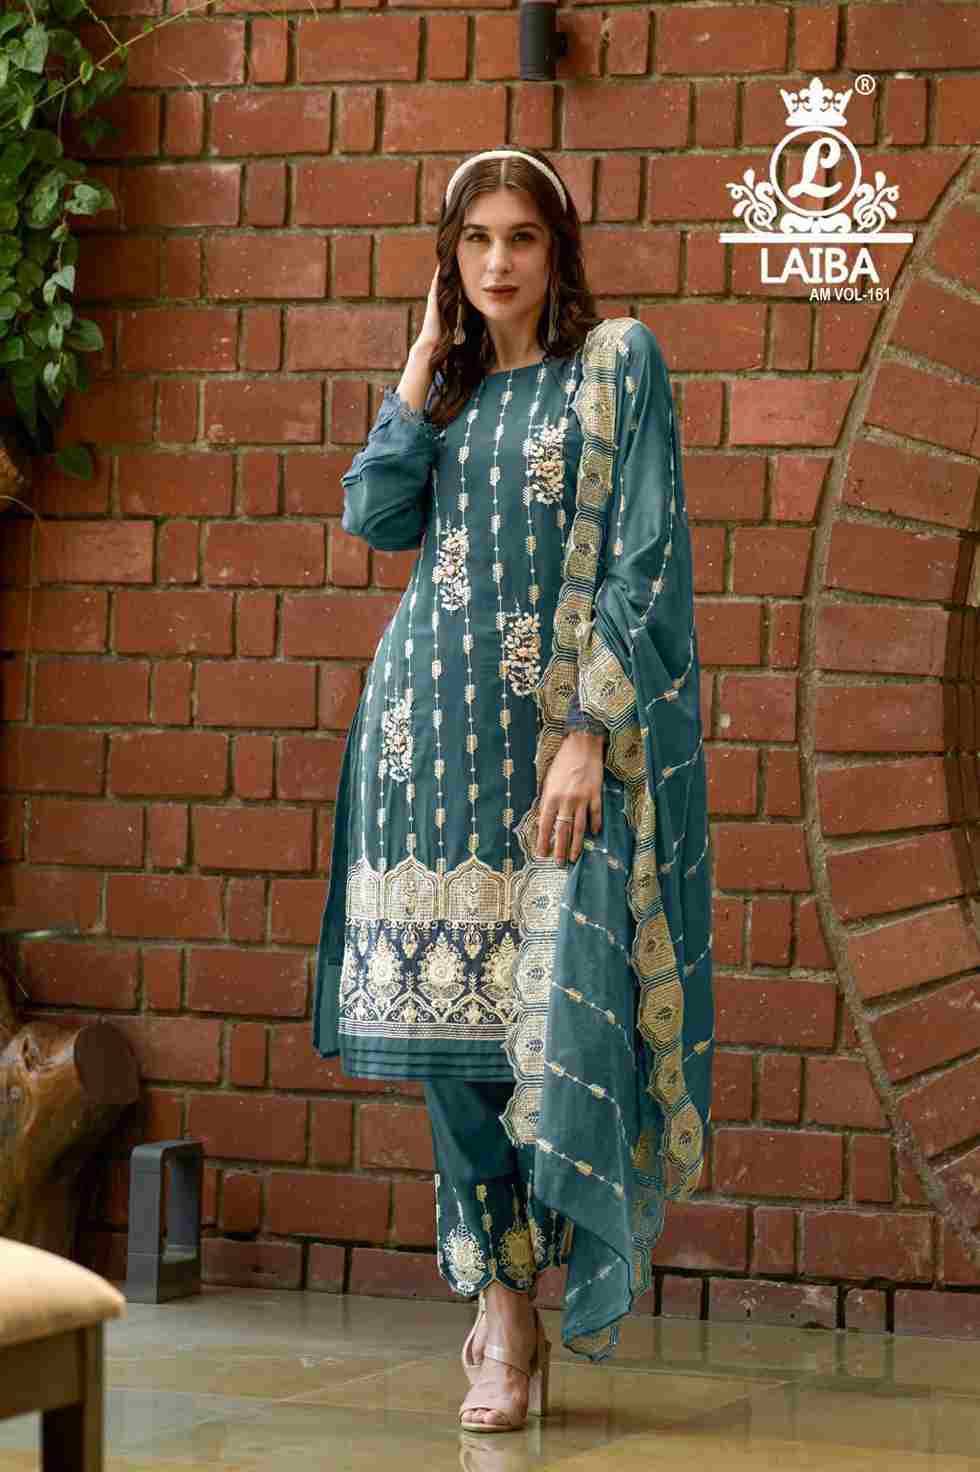 AM Vol-161 By Laiba 161-A To 161-D Series Beautiful Stylish Festive Suits Fancy Colorful Casual Wear & Ethnic Wear & Ready To Wear Pure Georgette Embroidered Dresses At Wholesale Price